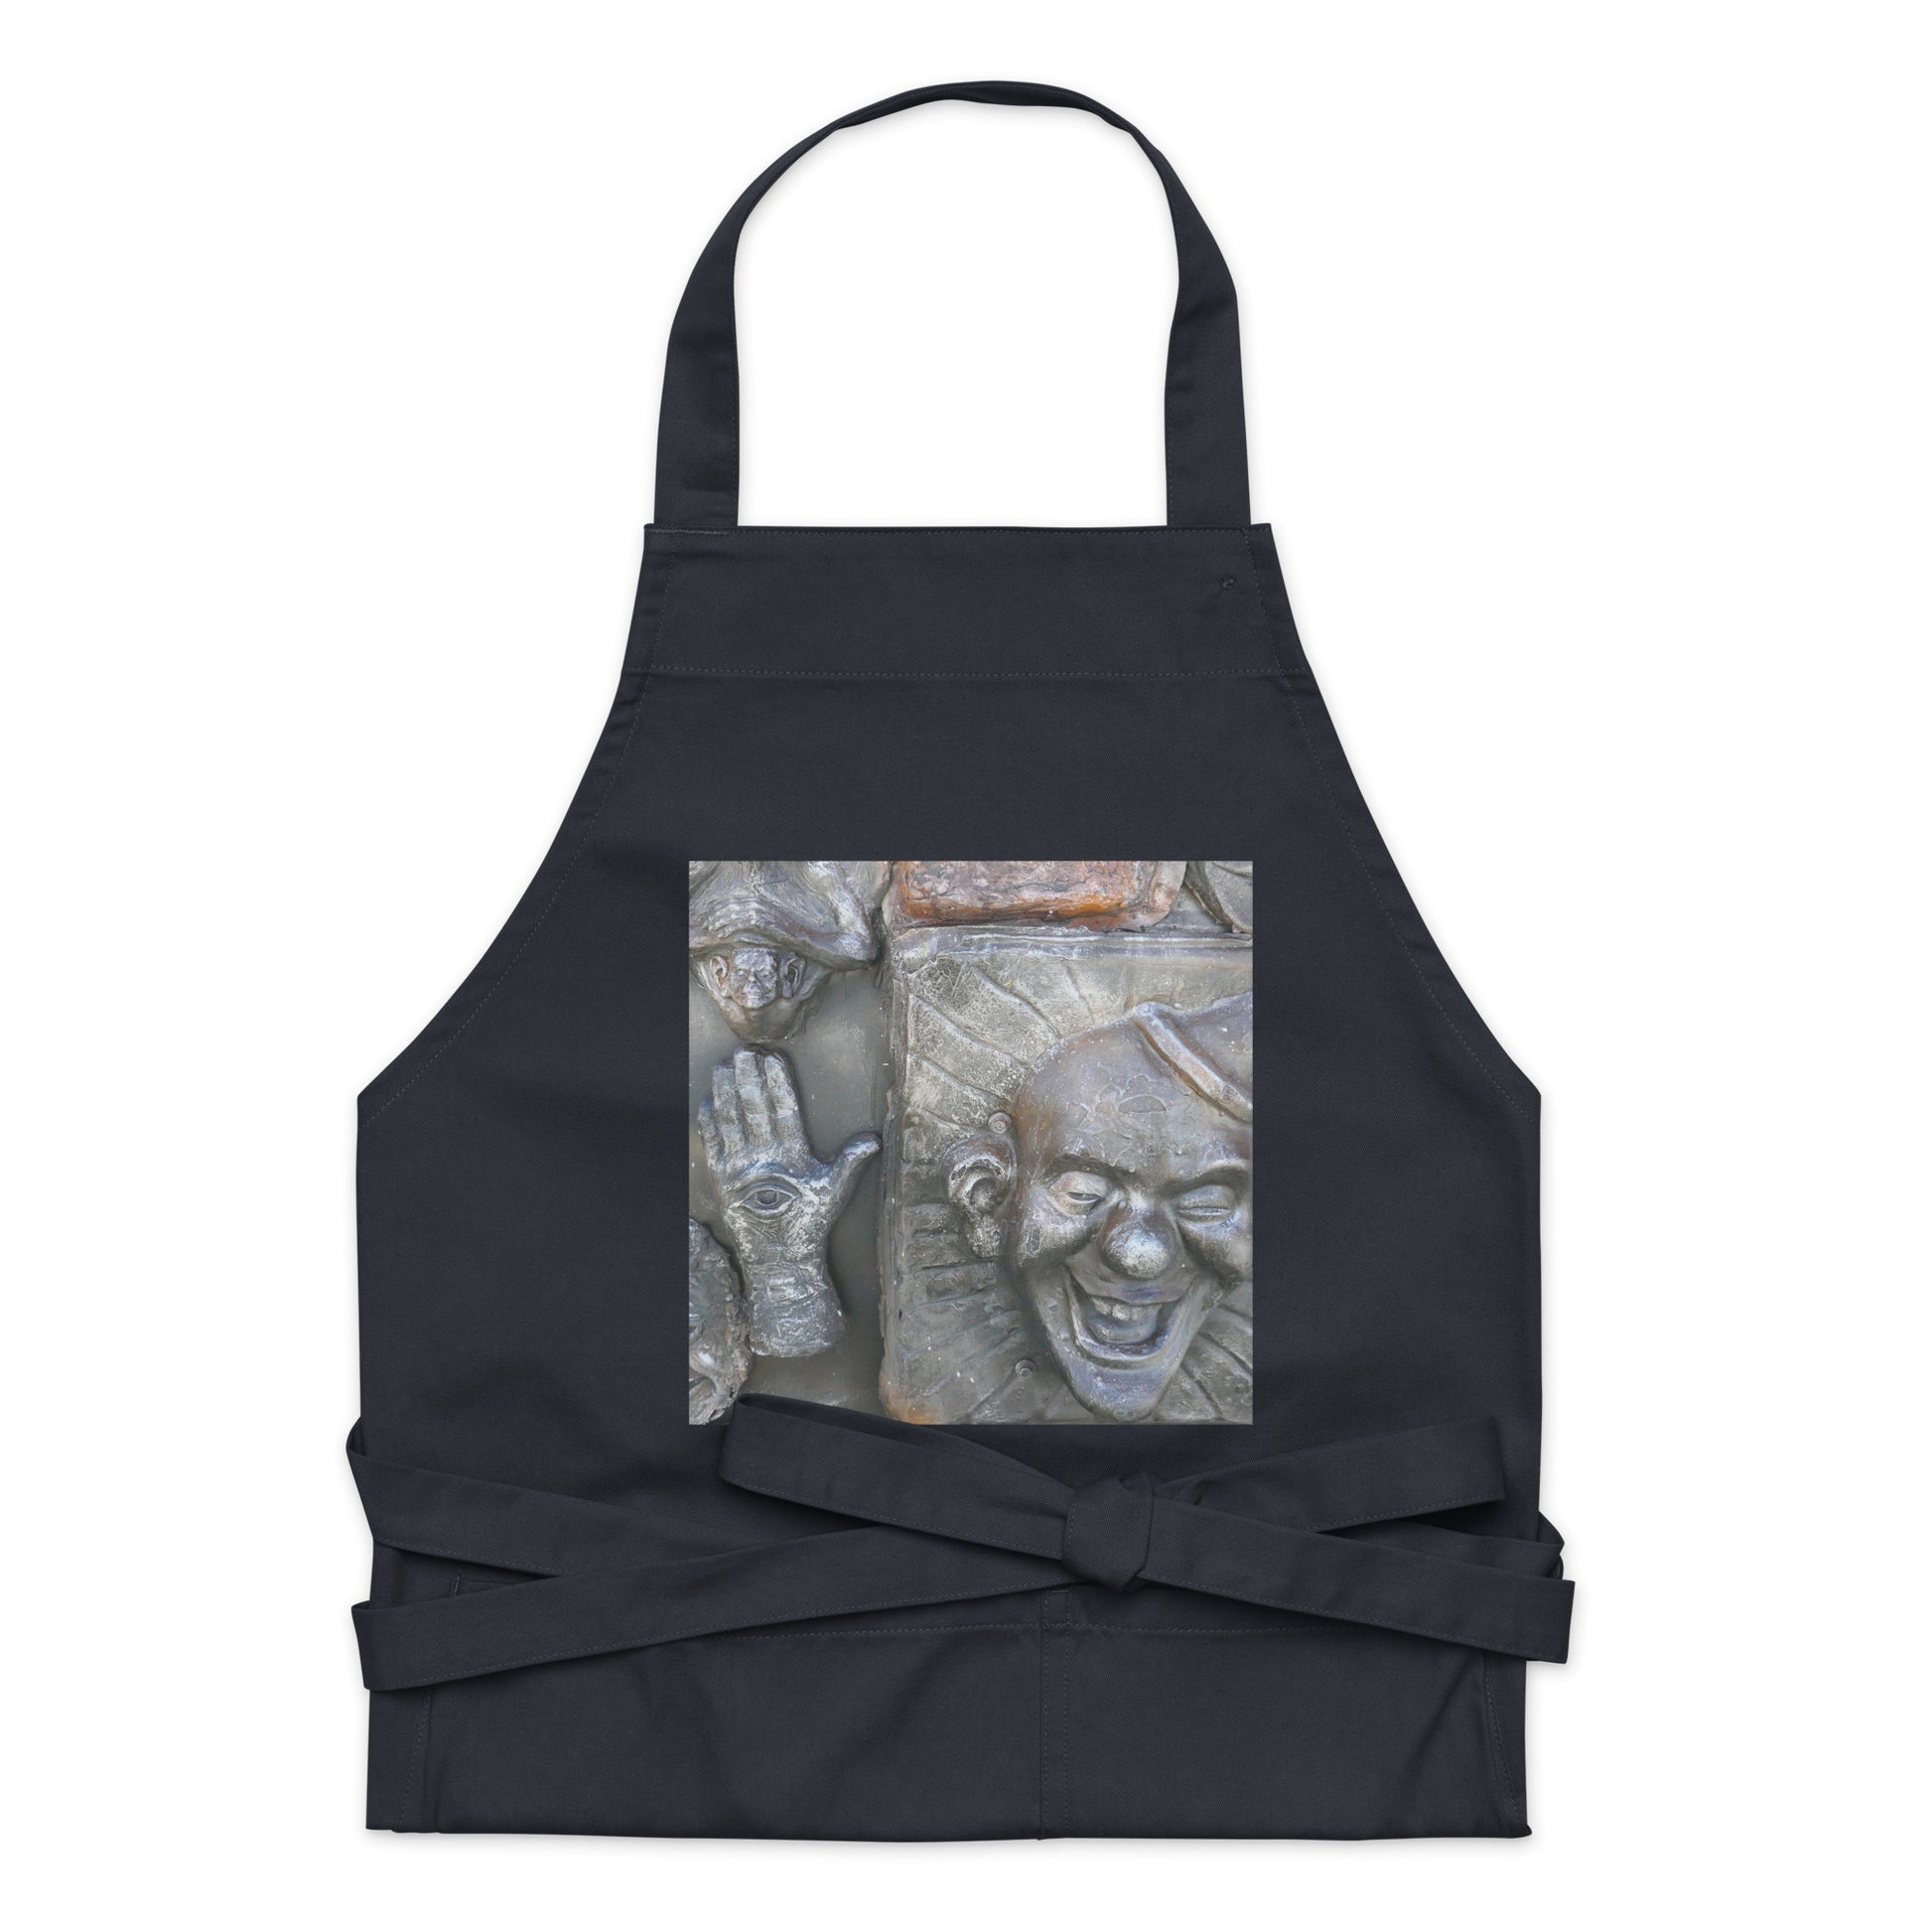 Cosmic Laughter - Organic cotton apron - Fry1Productions